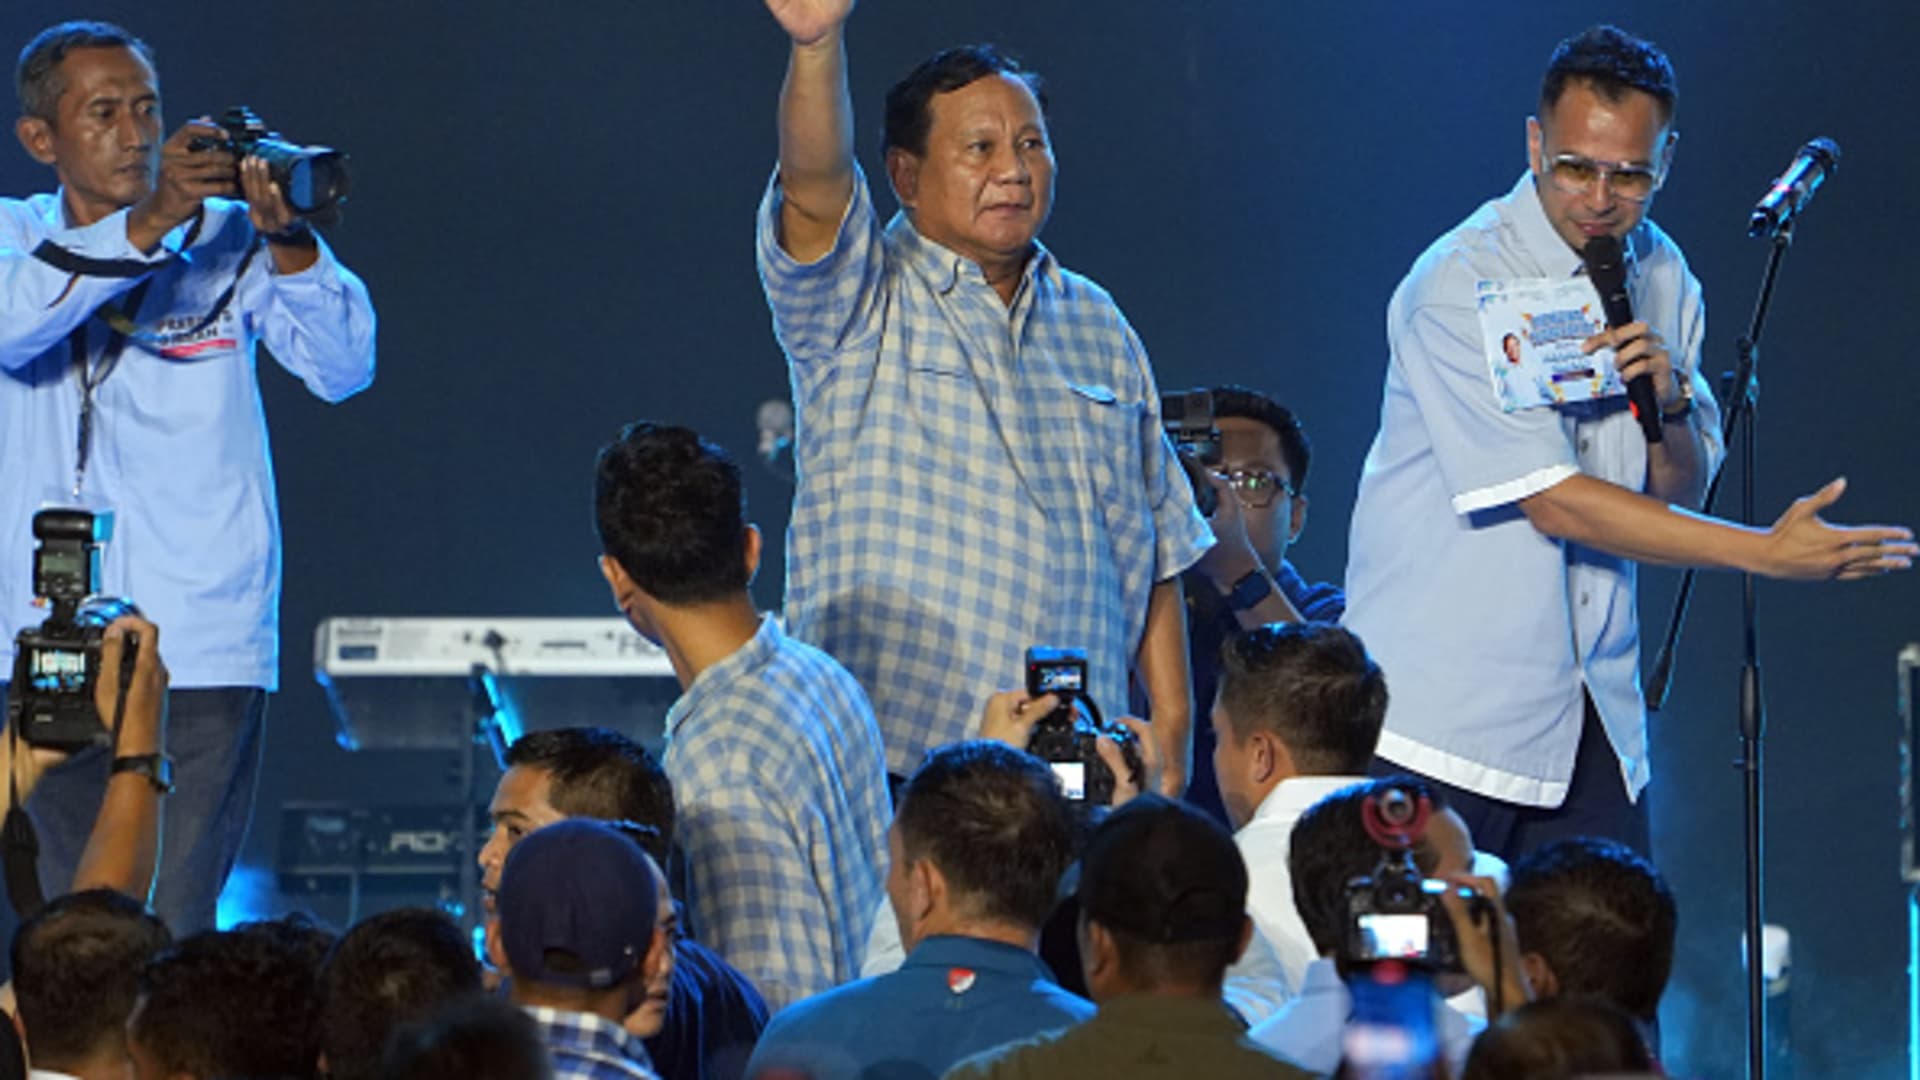 Indonesia’s next president Prabowo made big promises on the campaign trail. Can he deliver?